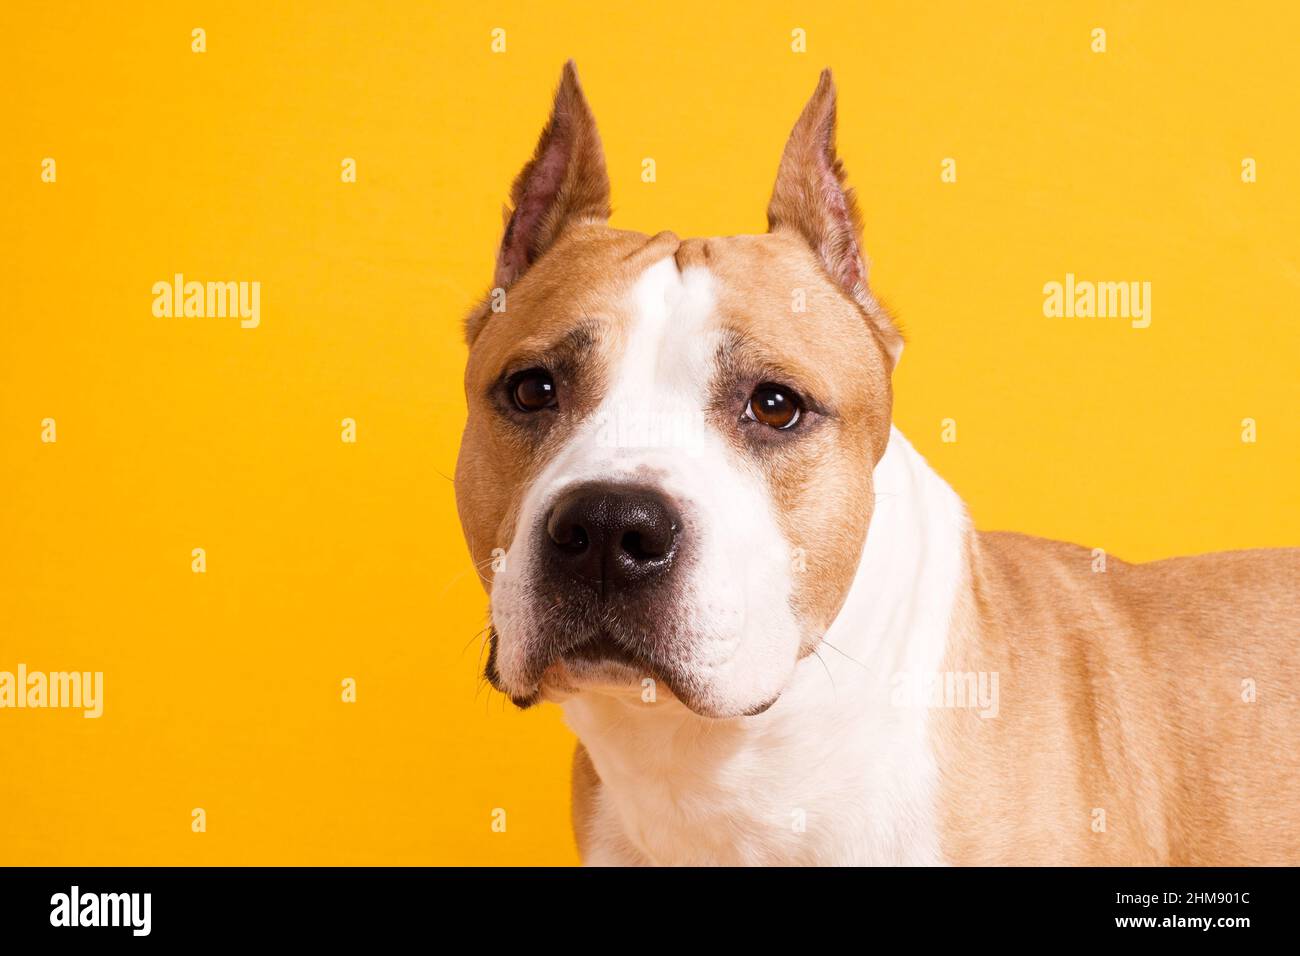 dog breed american staffordshire terrier close-up on a yellow background. High quality photo Stock Photo